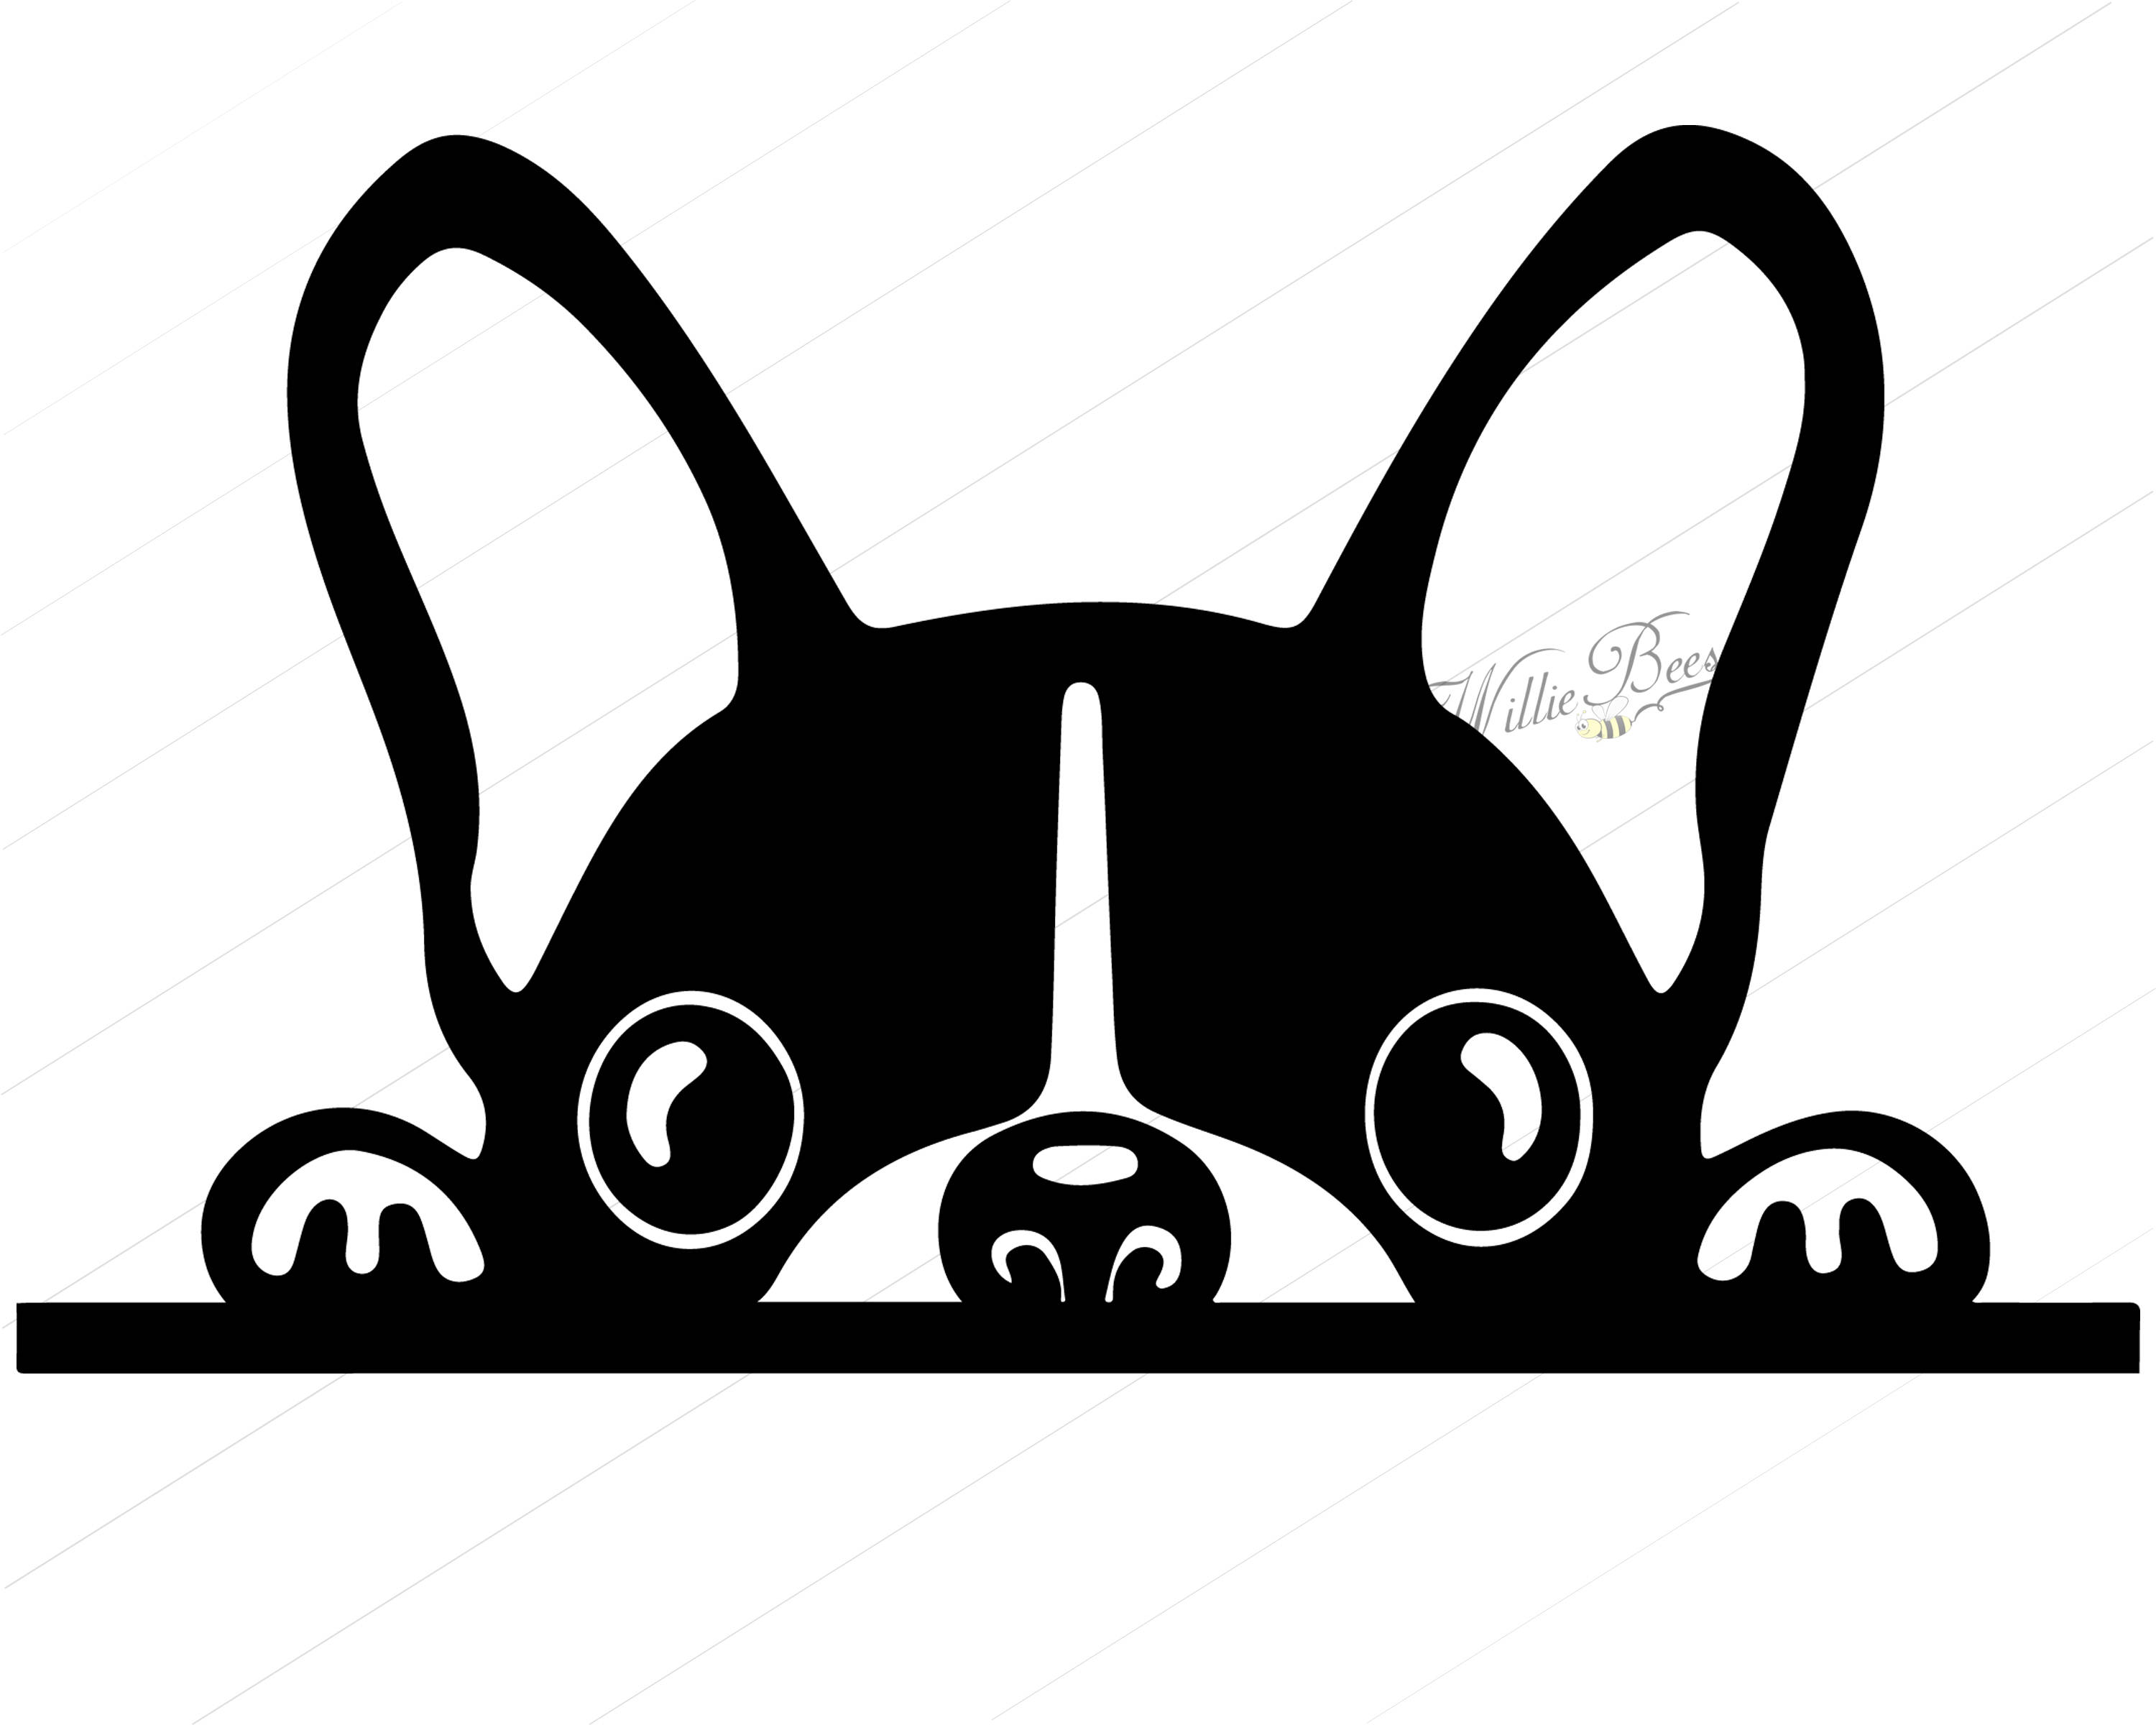 Peeking Dog SVG Silhouette Clipart, Canine, Family Pet, Dog, Peeking Dog,  Dog SVG, Dog Clipart, 12 inches, Instant Download